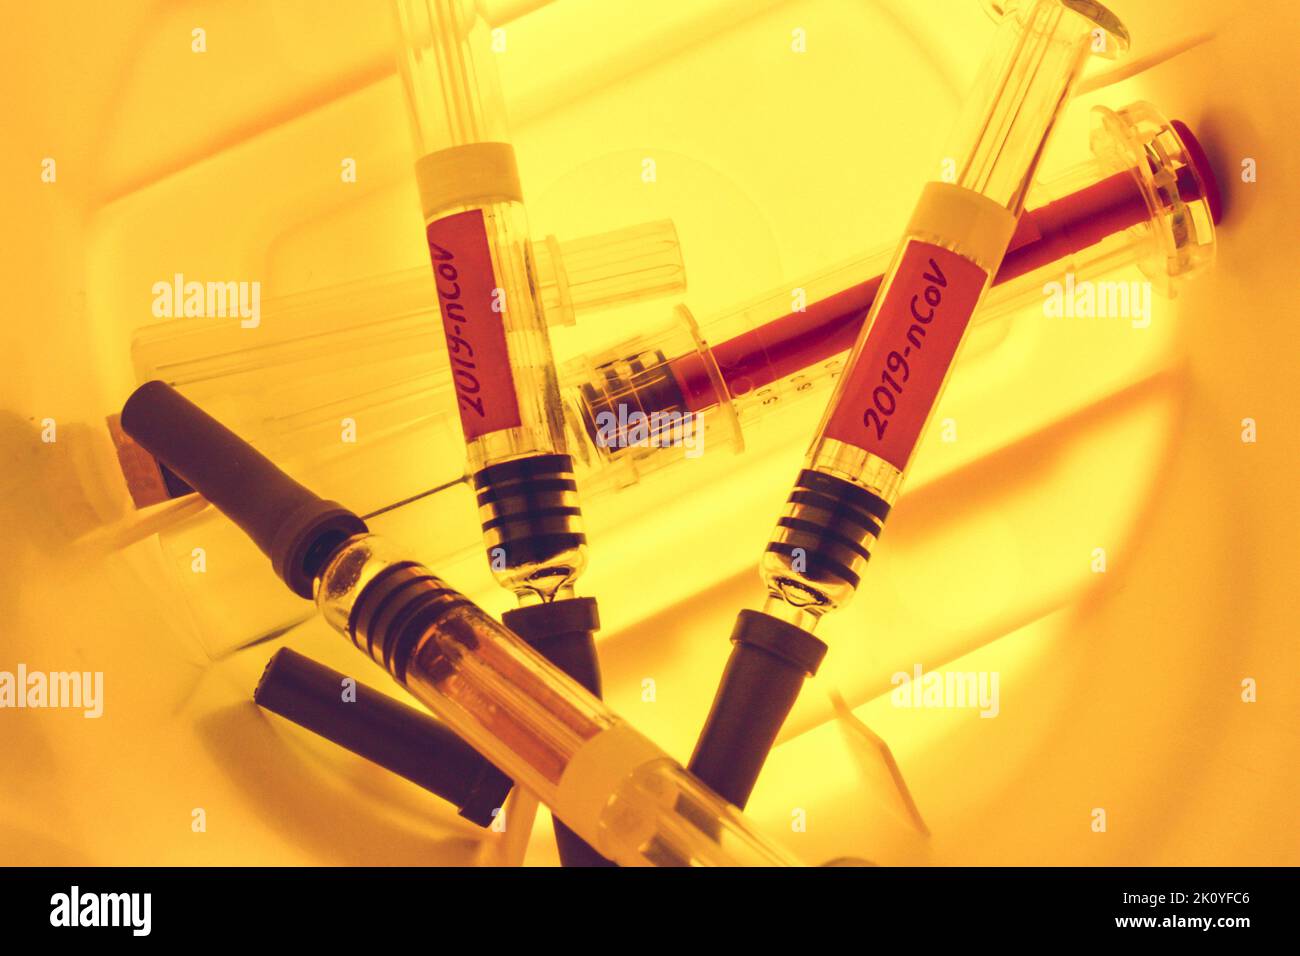 Syringes inside a Sharps Collector Stock Photo